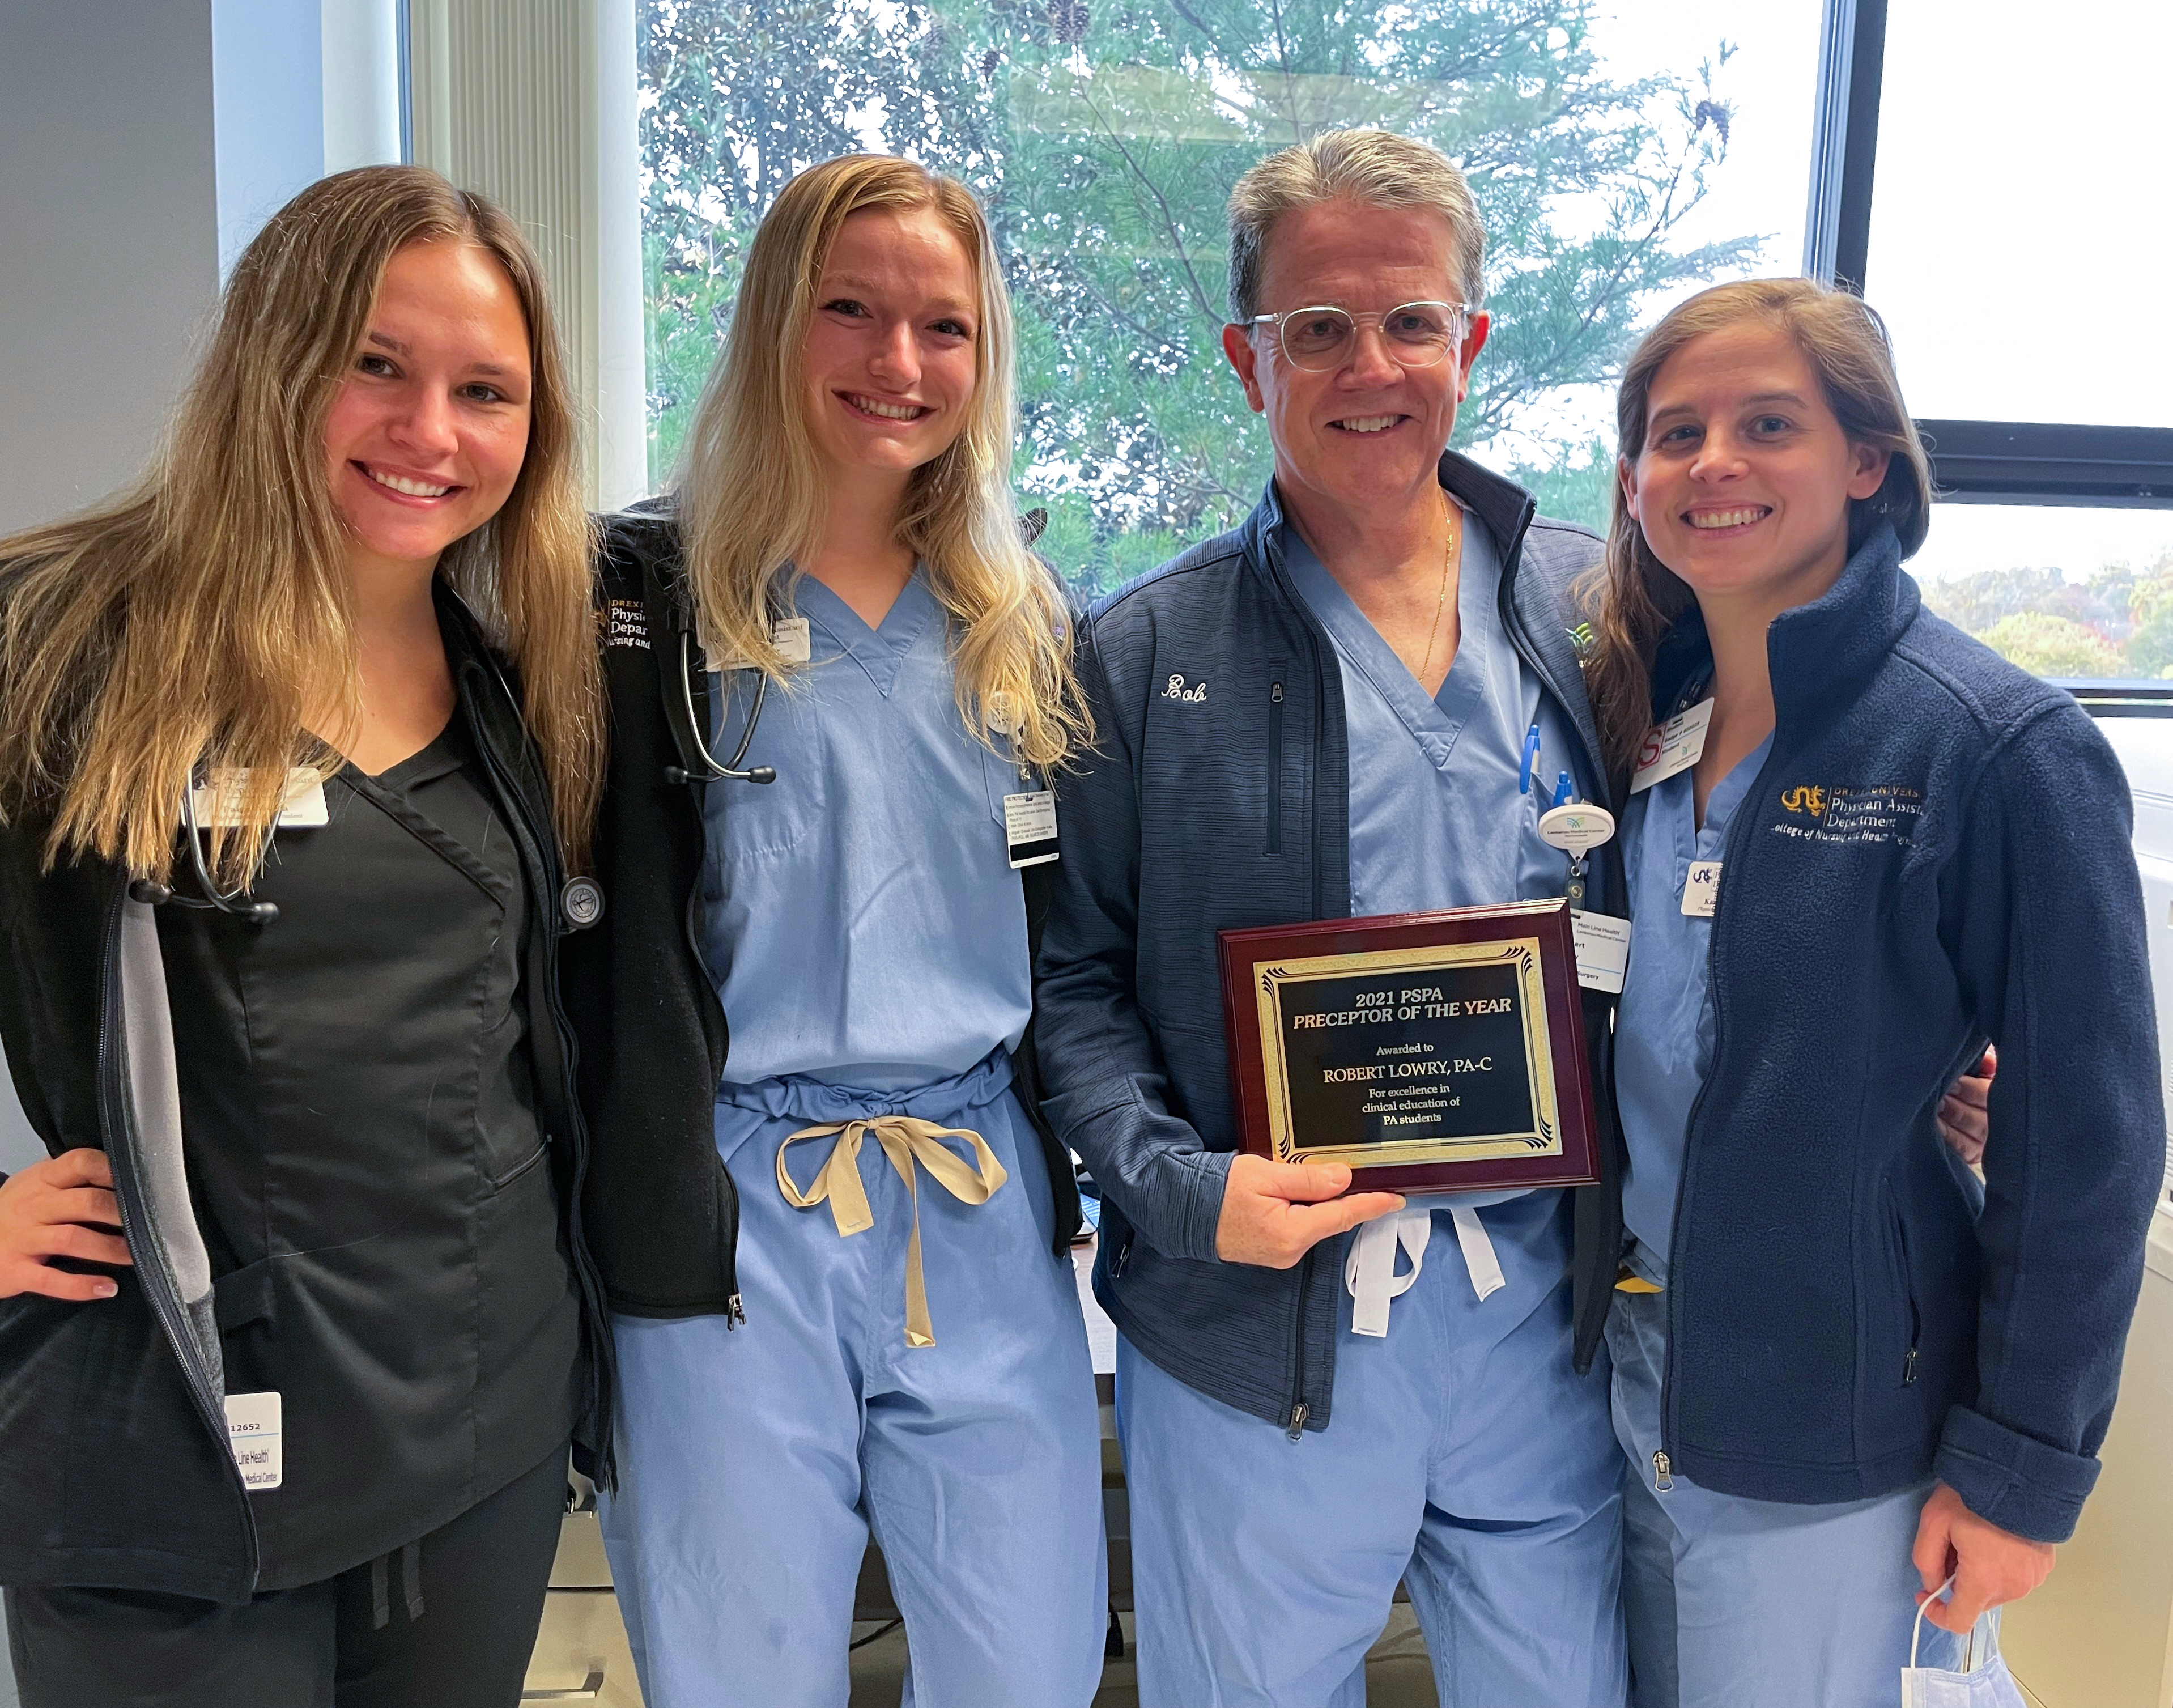 Bob Lowry, PA-C, a preceptor in the College of Nursing and Health Professions, holding his Preceptor of the Year award with three Drexel students. 